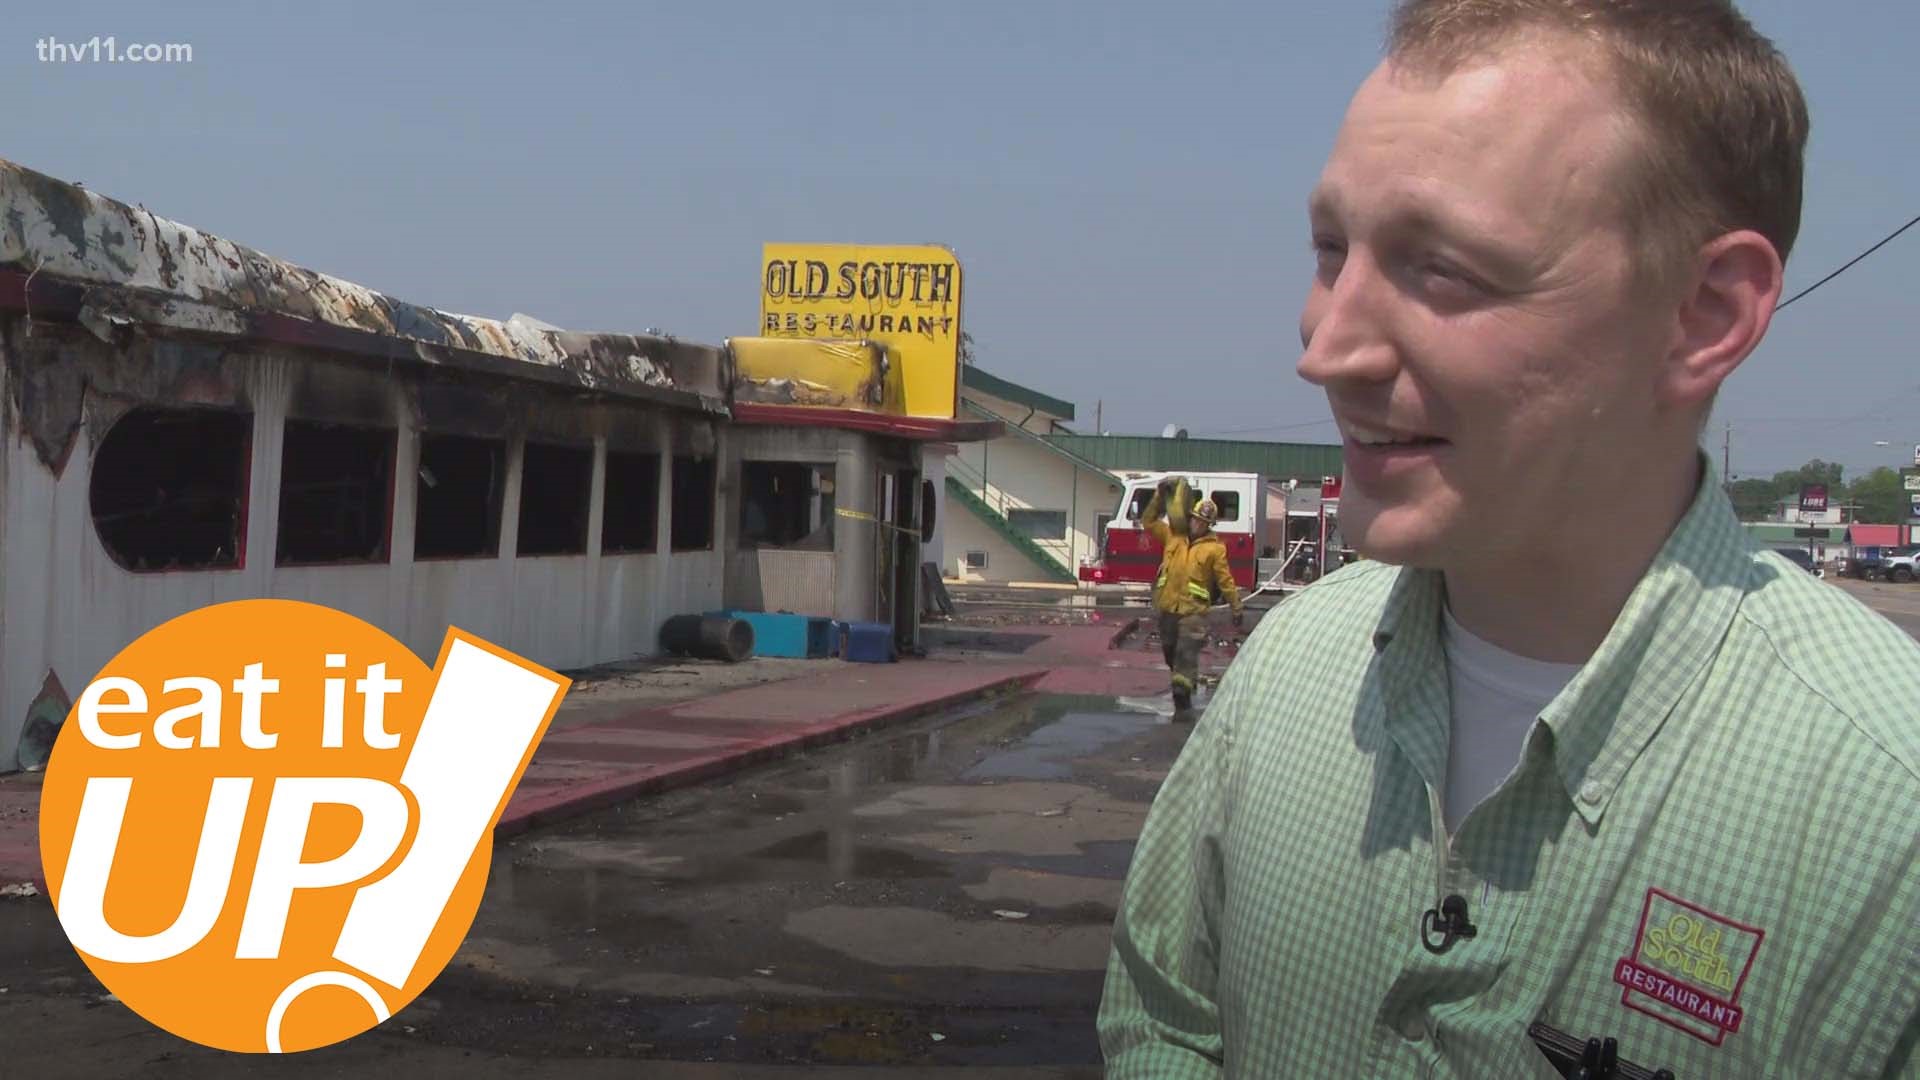 On this week's Eat It Up, Skot Covert revisits the Russellville's historic Old South diner after a fire destroyed it— the building may be gone, but the memories stay